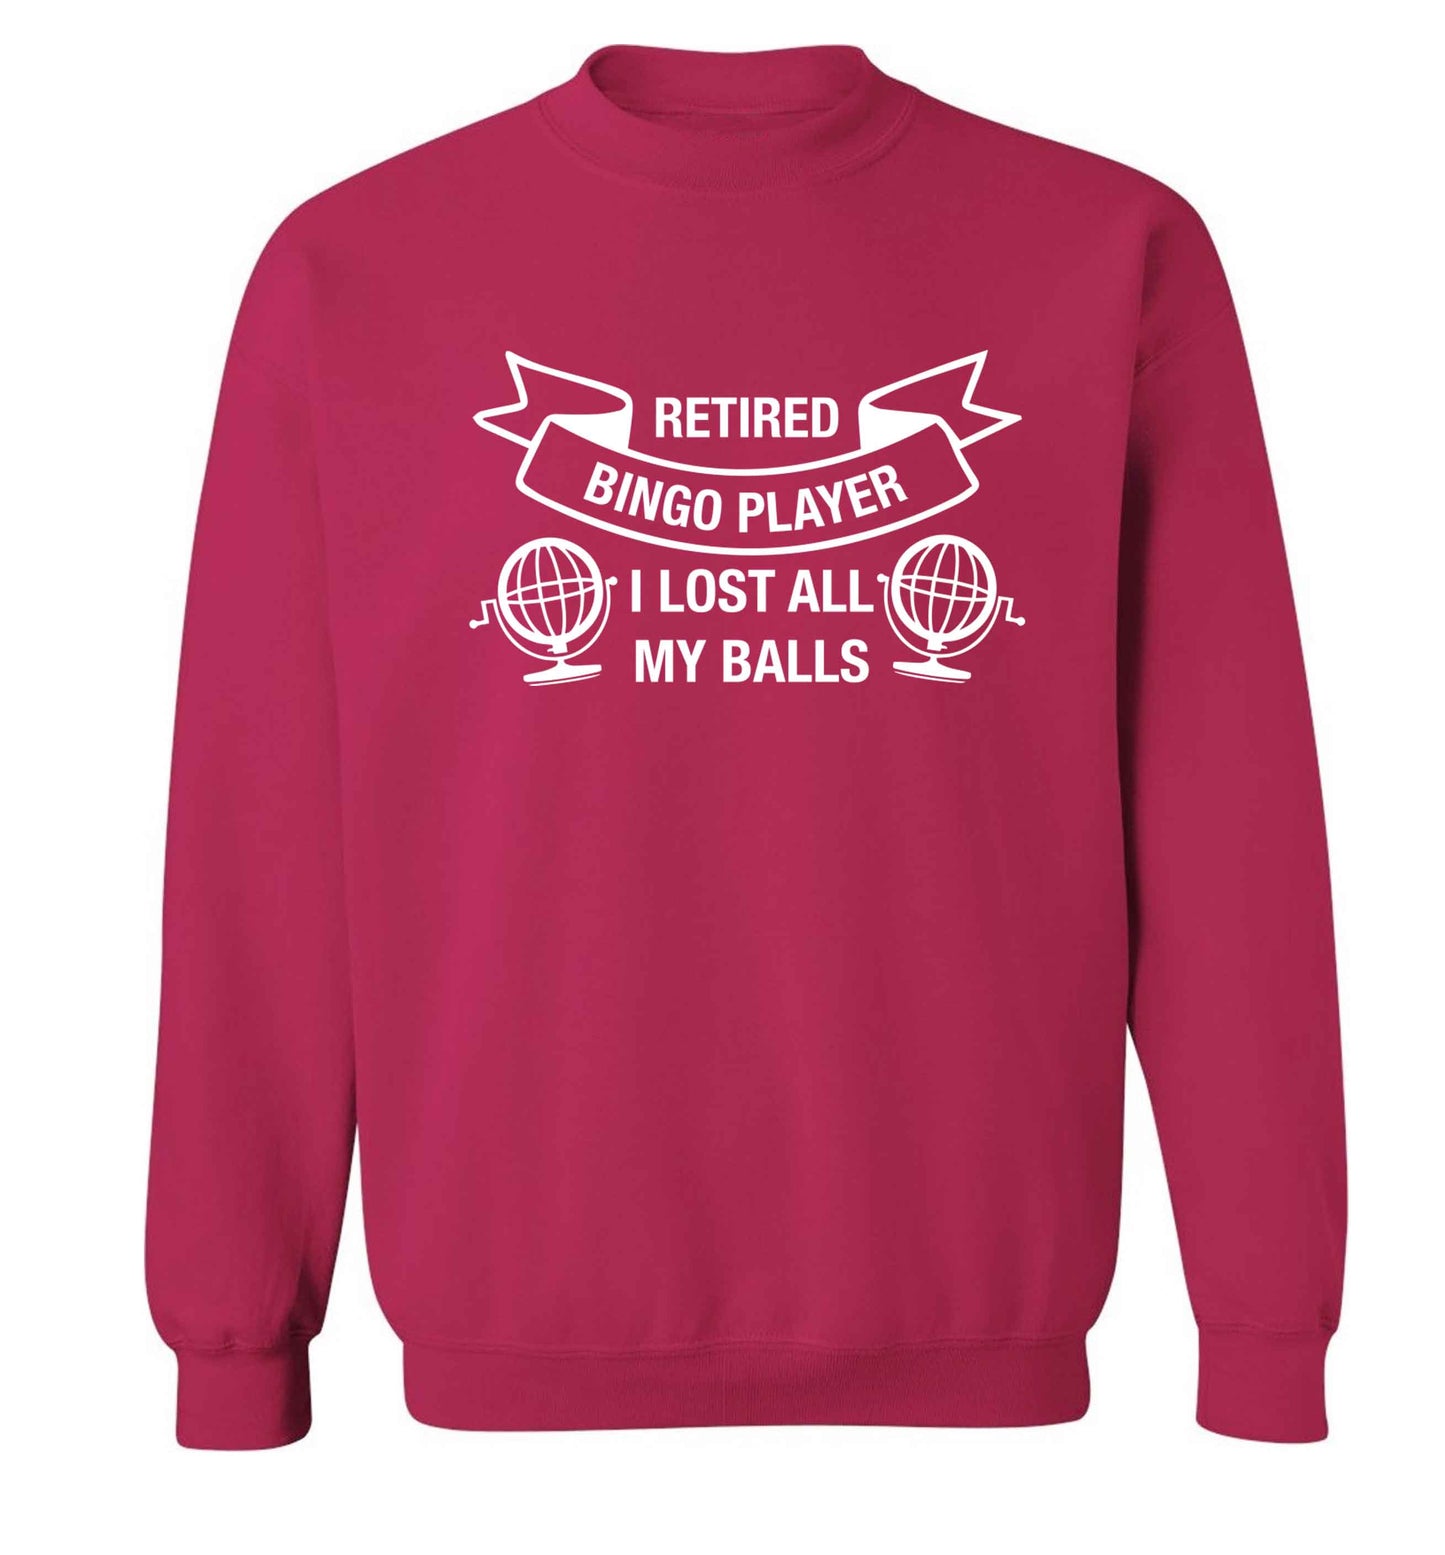 Retired bingo player I lost all my balls Adult's unisex pink Sweater 2XL